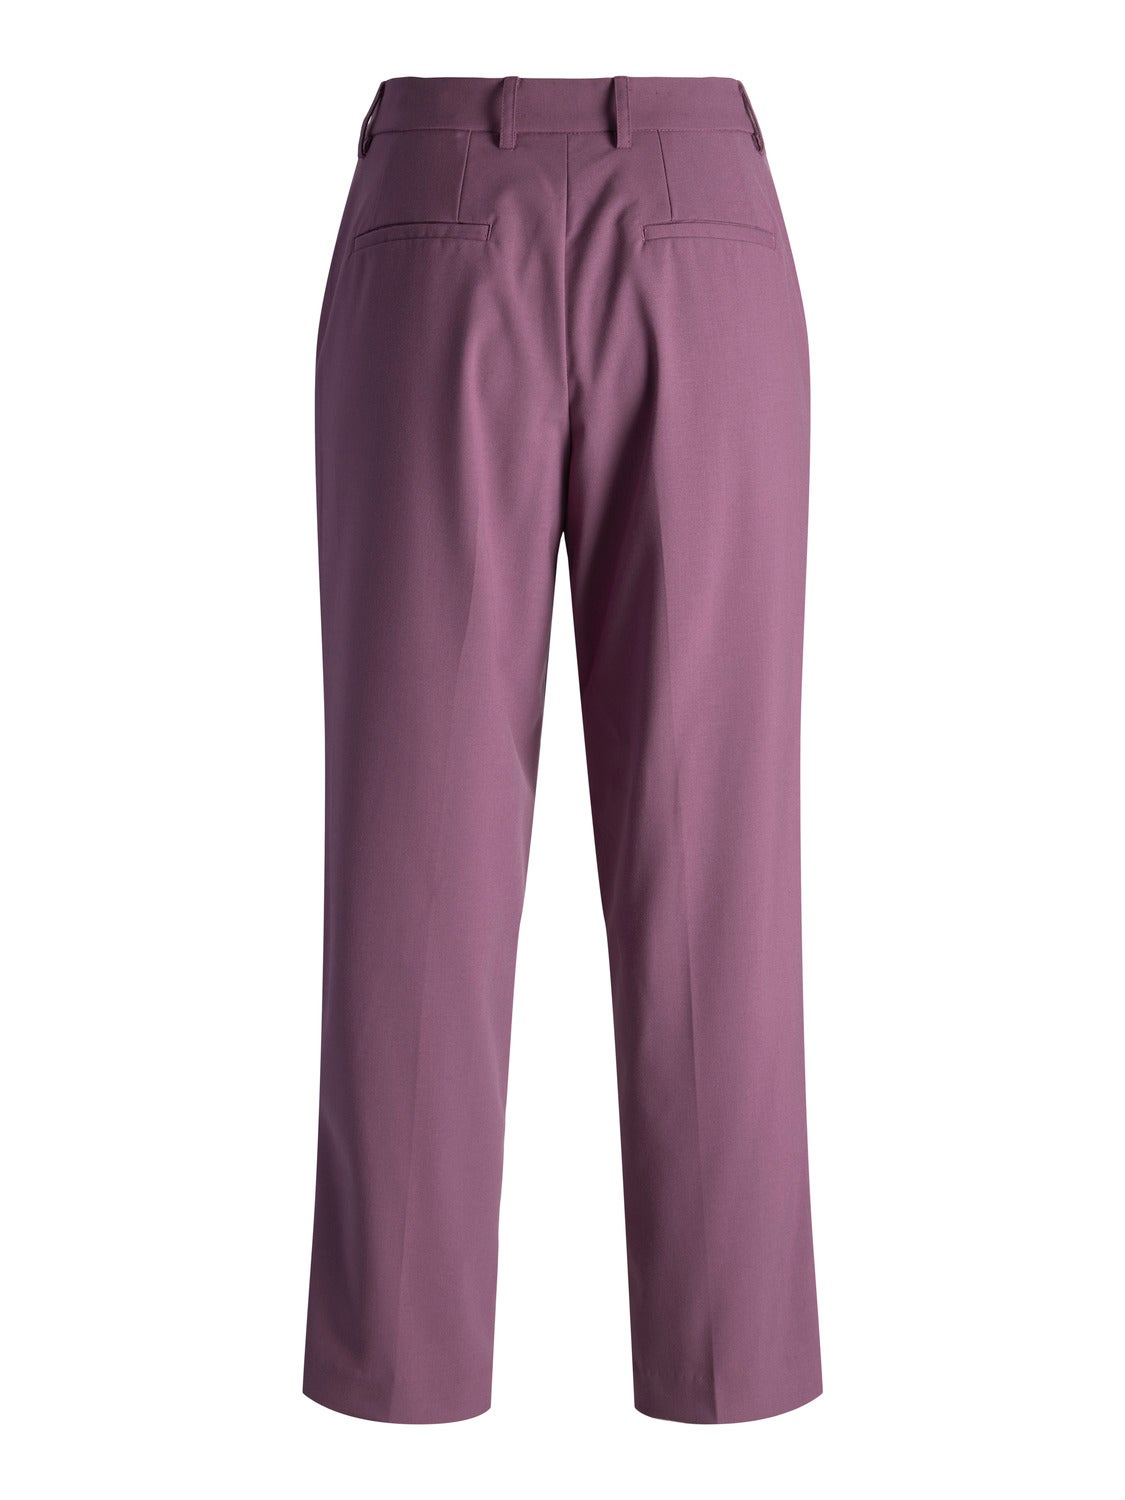 ERL Sequin Line Switching Pants (Trousers) Purple M | PLAYFUL